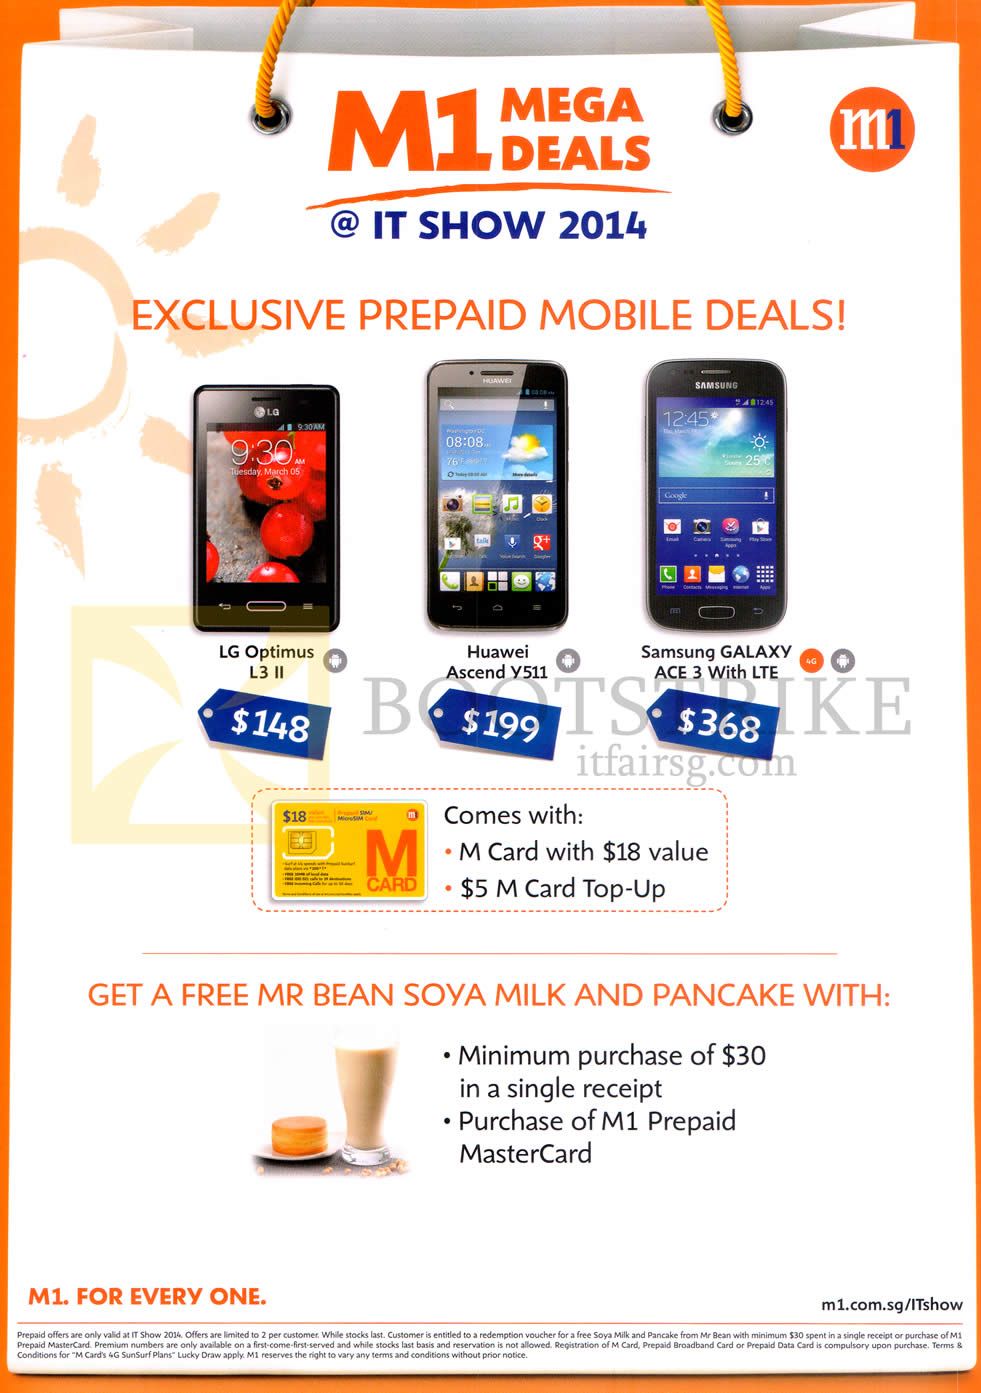 IT SHOW 2014 price list image brochure of M1 Prepaid Mobile Deals LG Optimus L3 II, Huawei Ascend Y511, Samsung Galaxy Ace 3